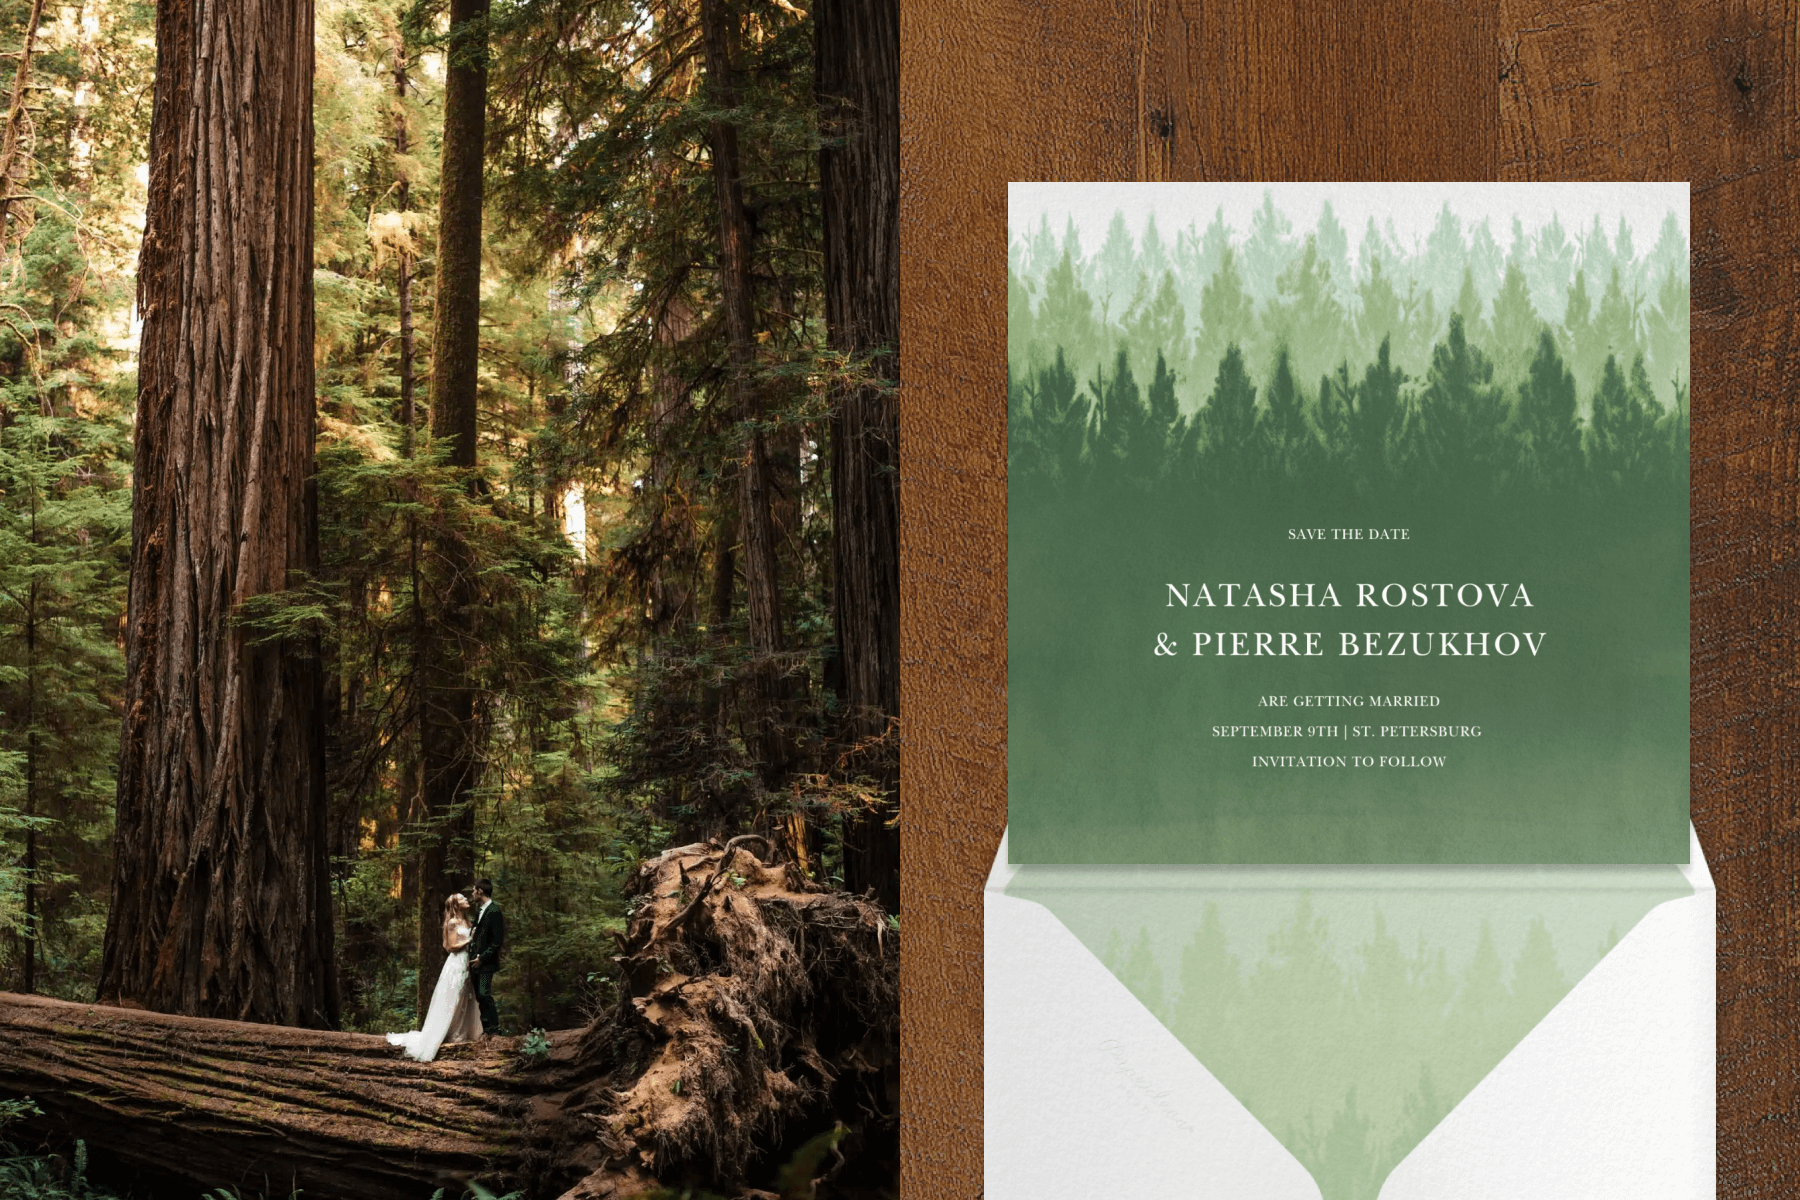 A couple in wedding garb stands on a giant fallen tree trunk in a forest; a save the date with densely layered evergreen trees.